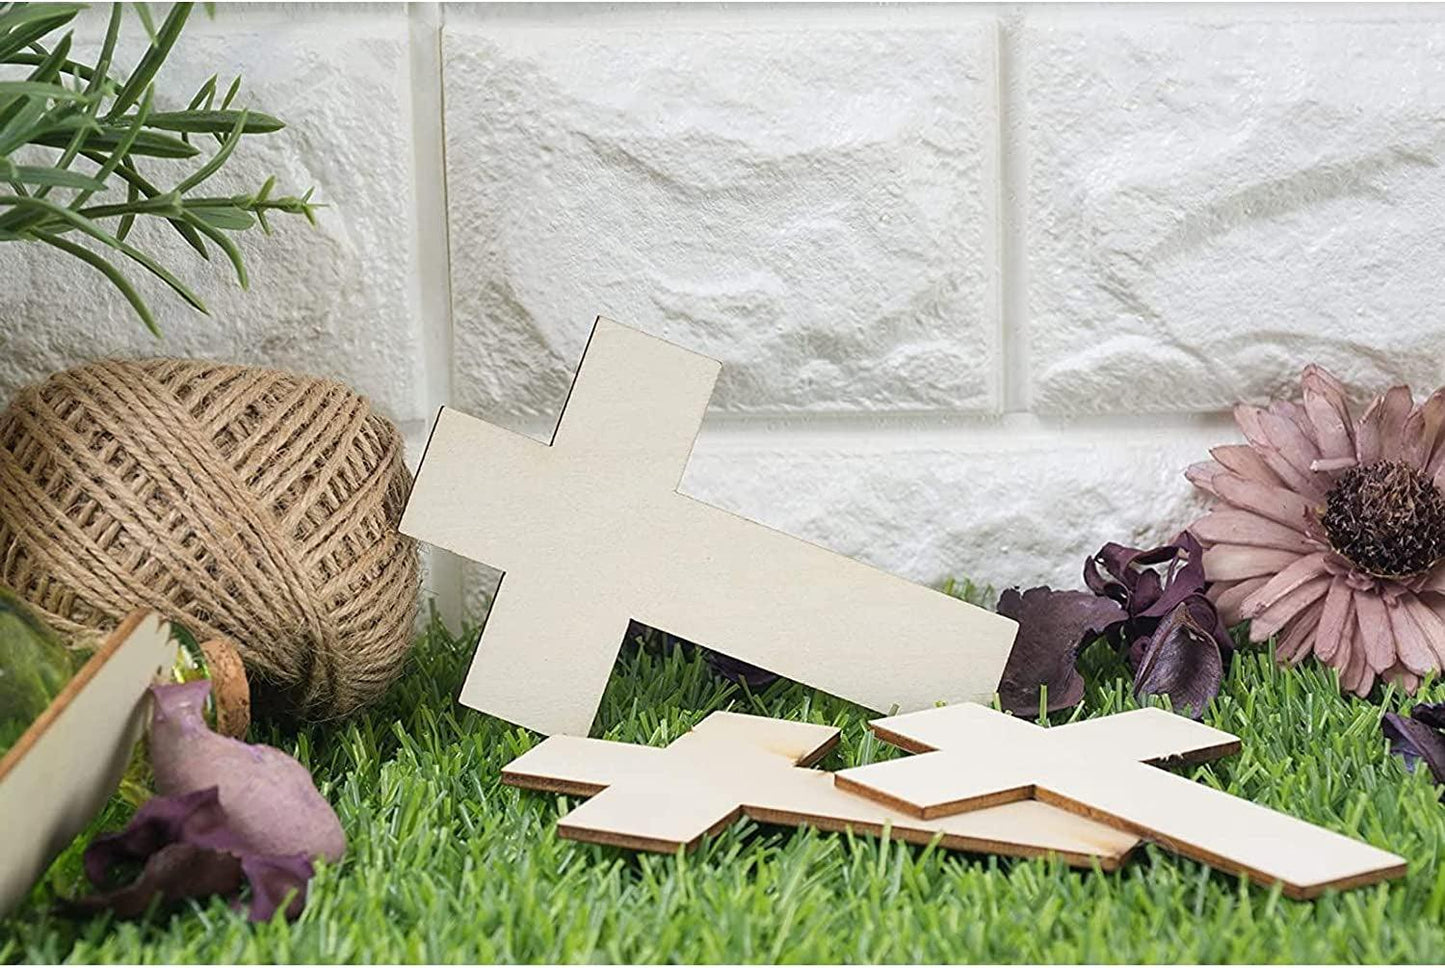 Unfinished Wood Cutout 25-Pack Cross Shaped for Wooden Craft DIY Projects, Sunday School, Church, Home 2.7 X 4.2" - WoodArtSupply